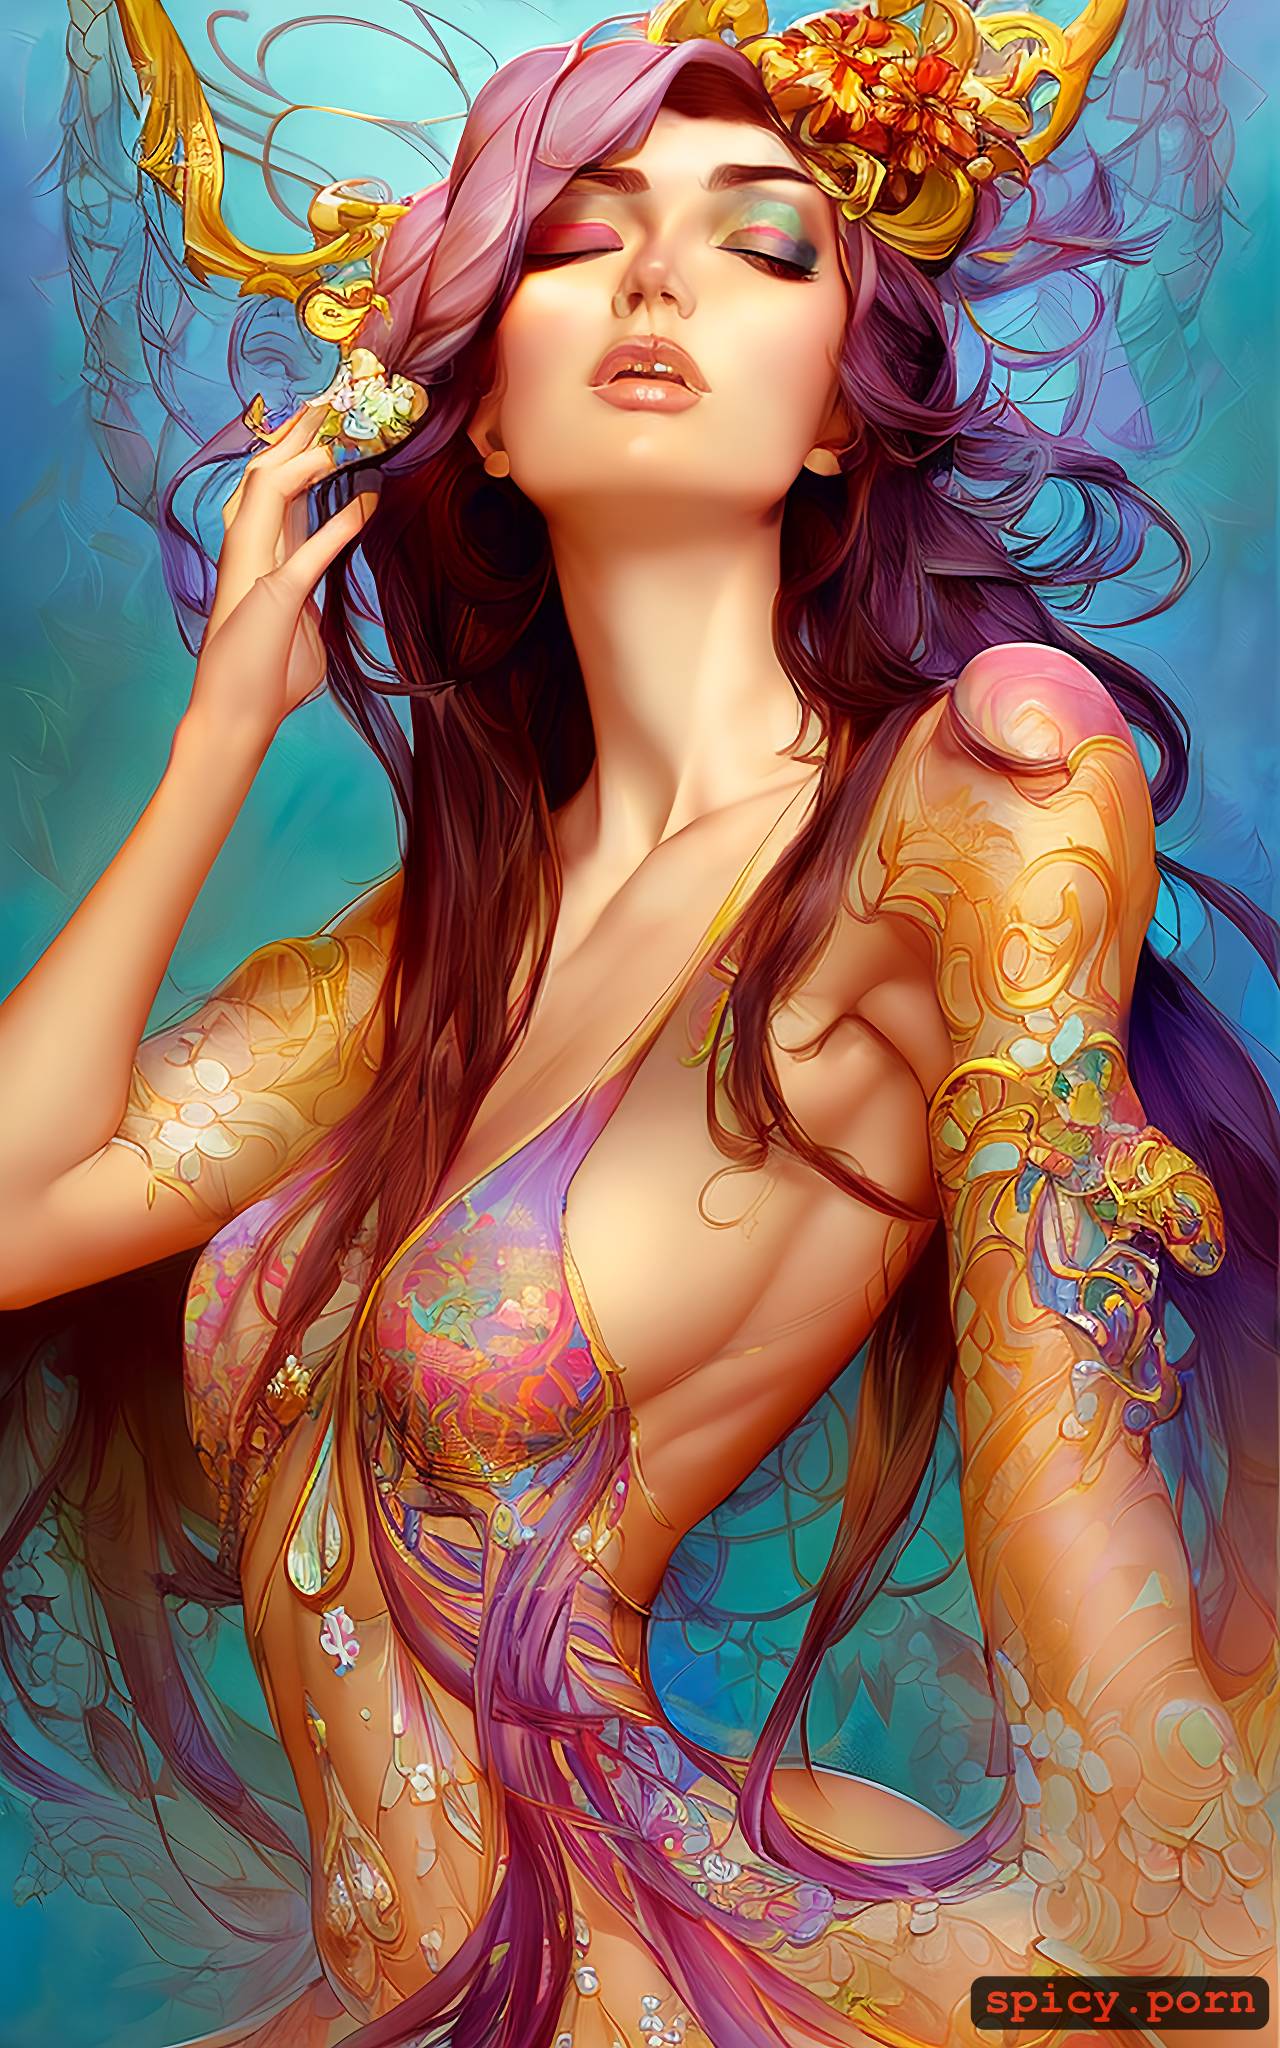 Perfect Porn Art - Image of art by anna dittmann, perfect body, iranian girl - spicy.porn